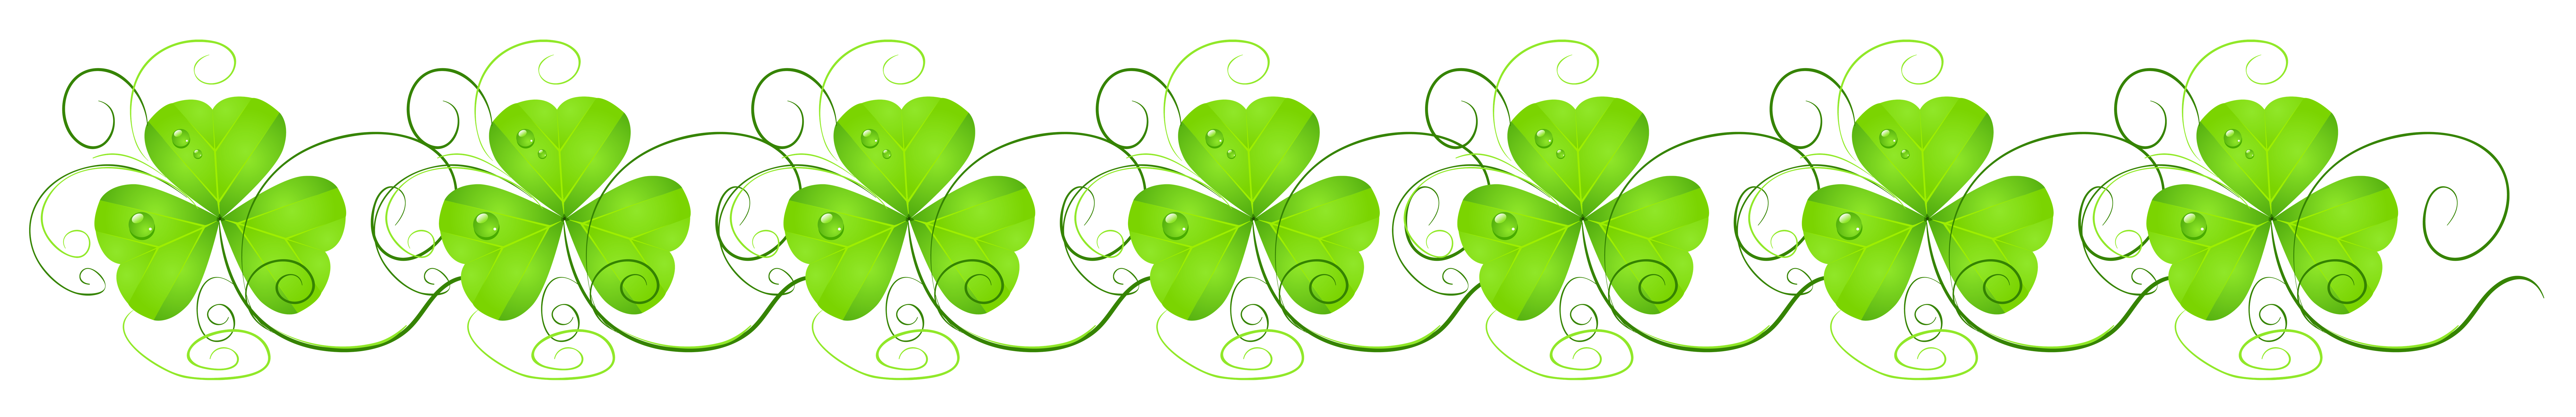 free clipart st patrick's day 1160476. 